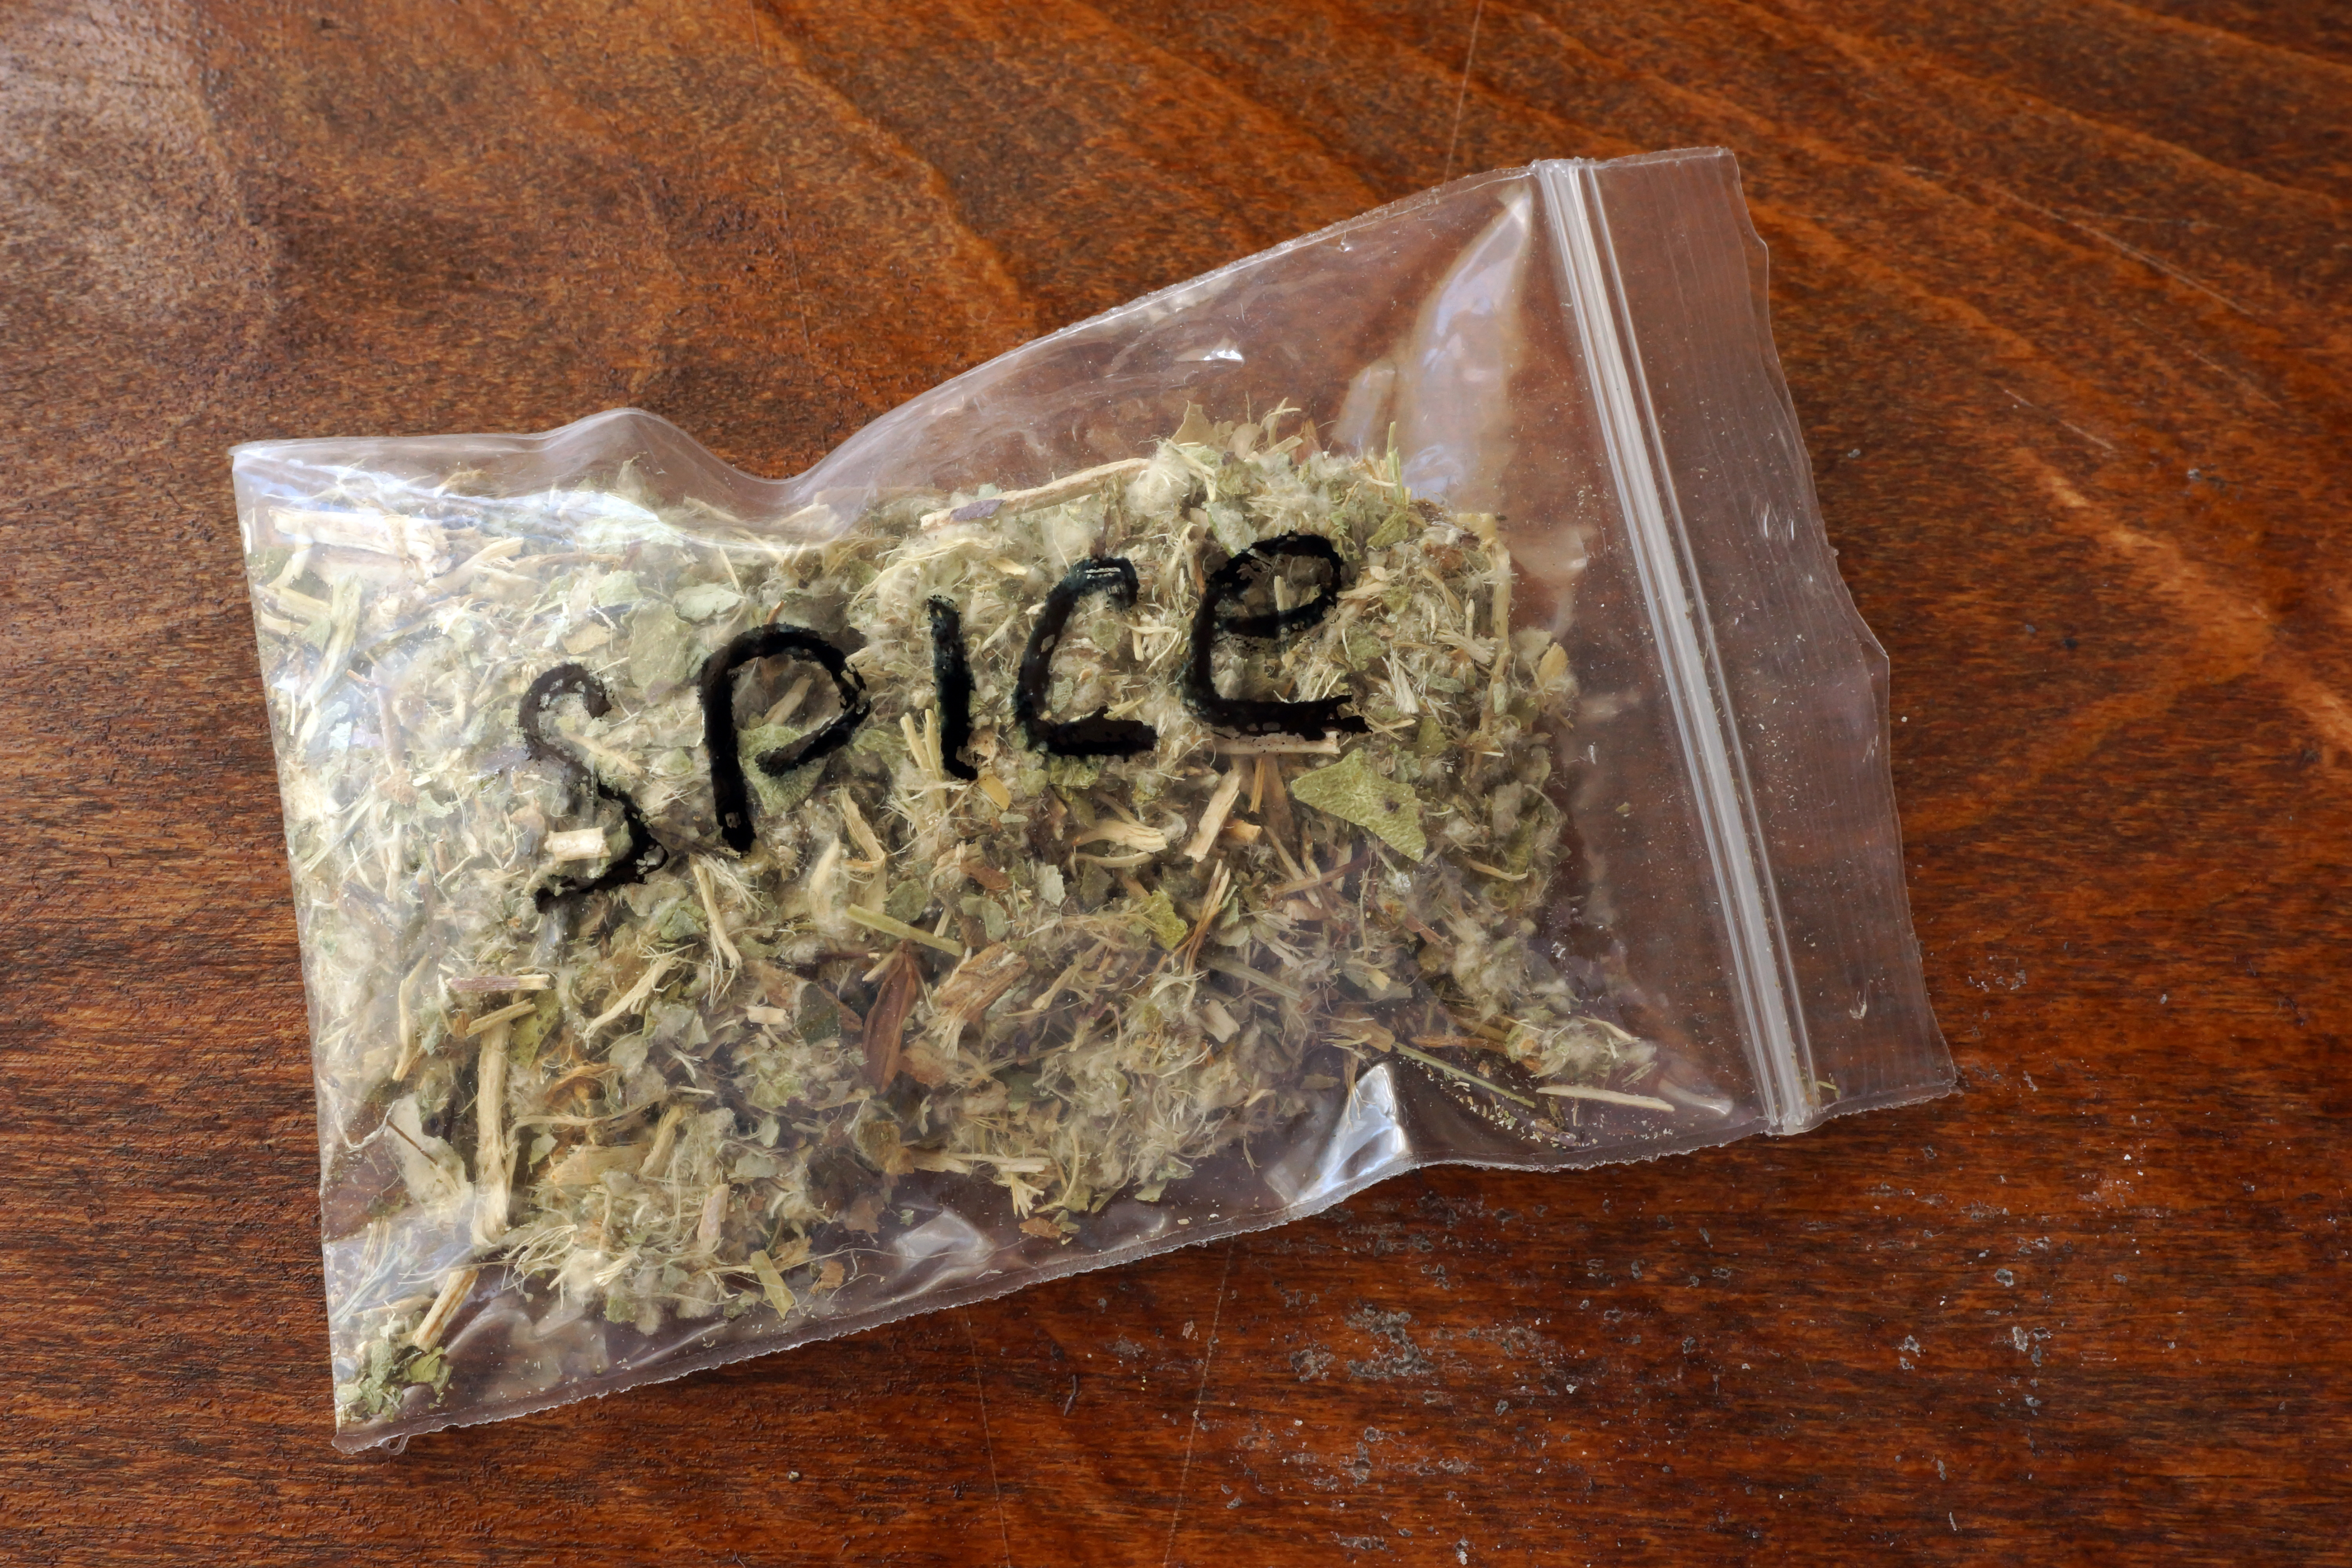 The dangerous high of synthetic weed